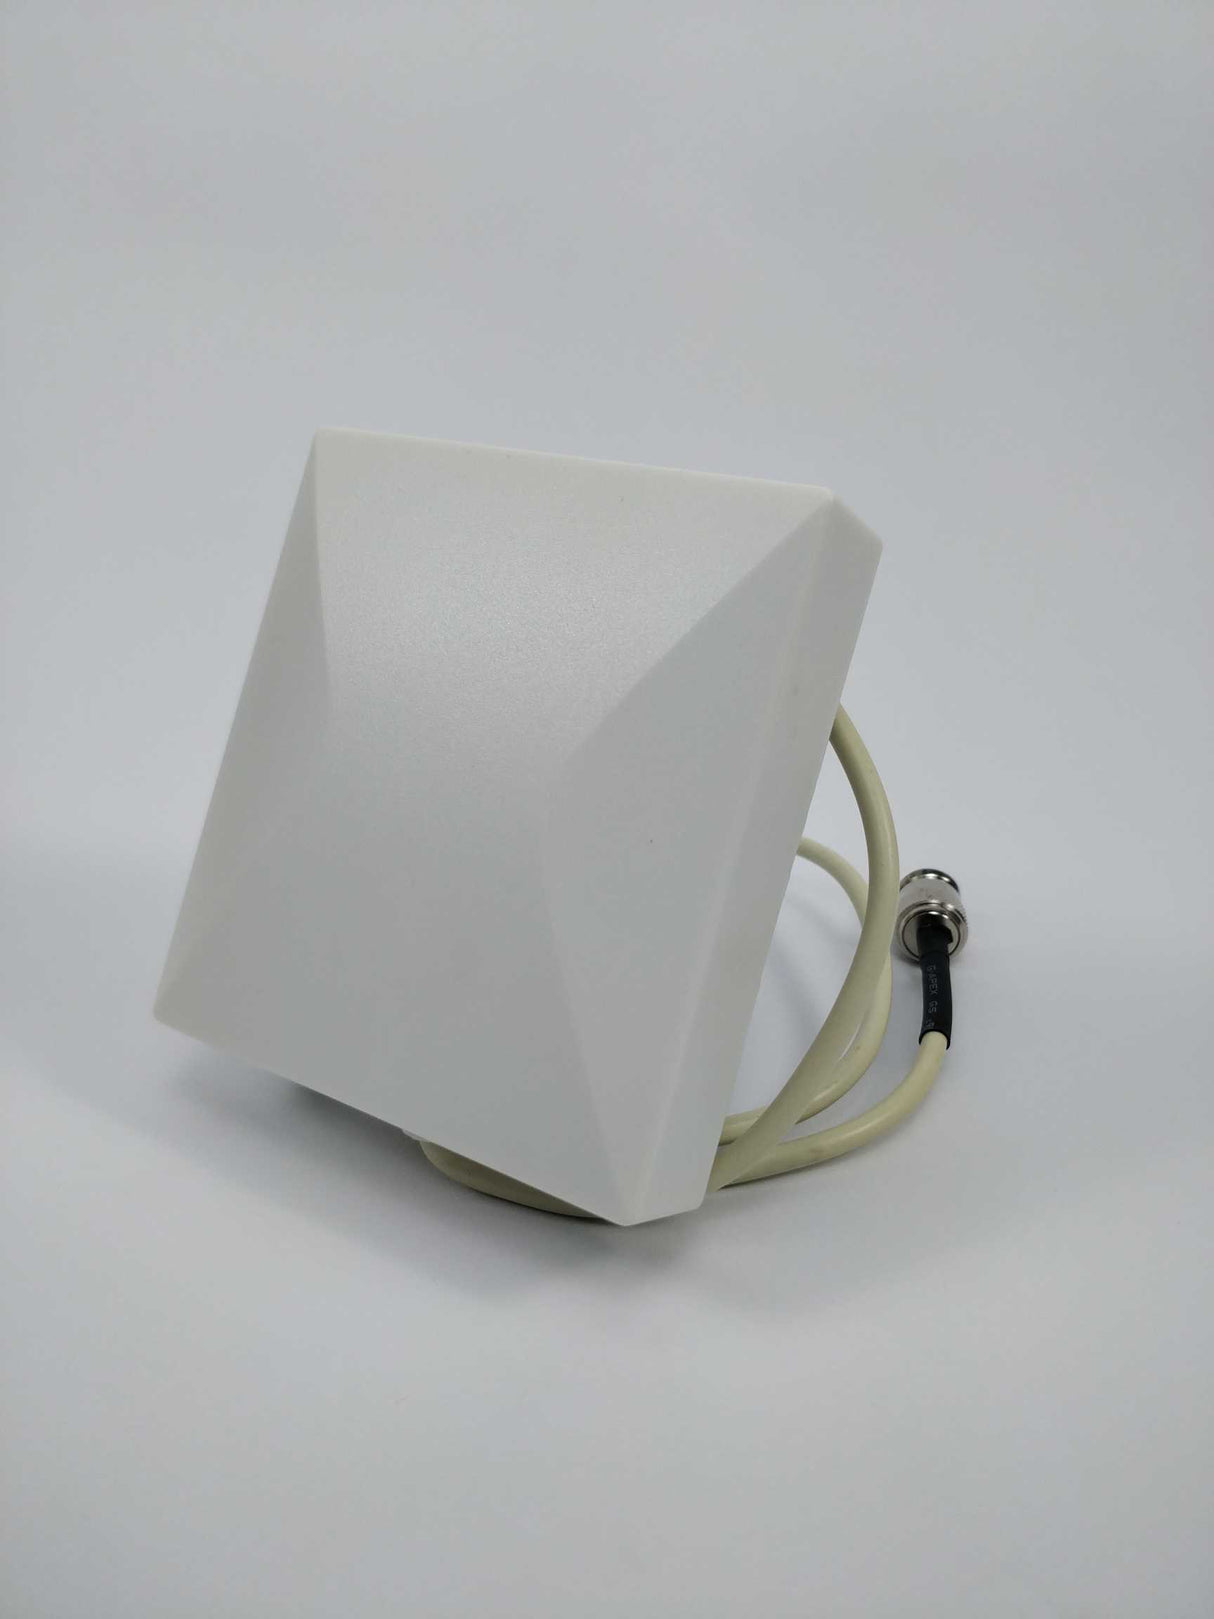 TerraWave solutions T24085P13602T 2.4 GHz 8.5 dBi patch antenna